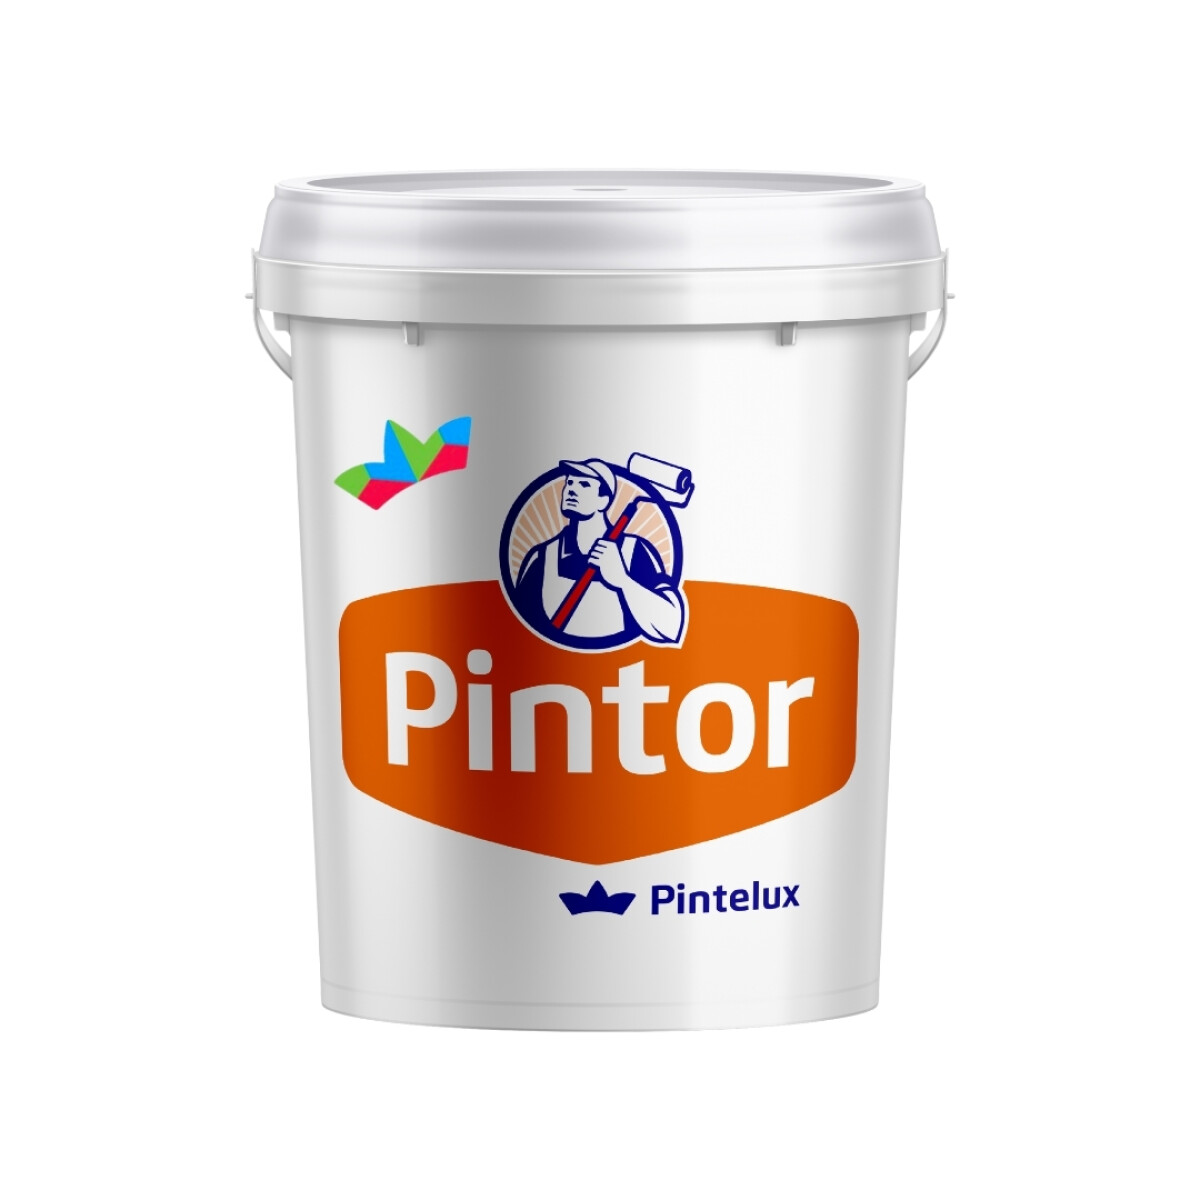 PINTOR MULTIPROPOSITO ROC - 3.6LTS 